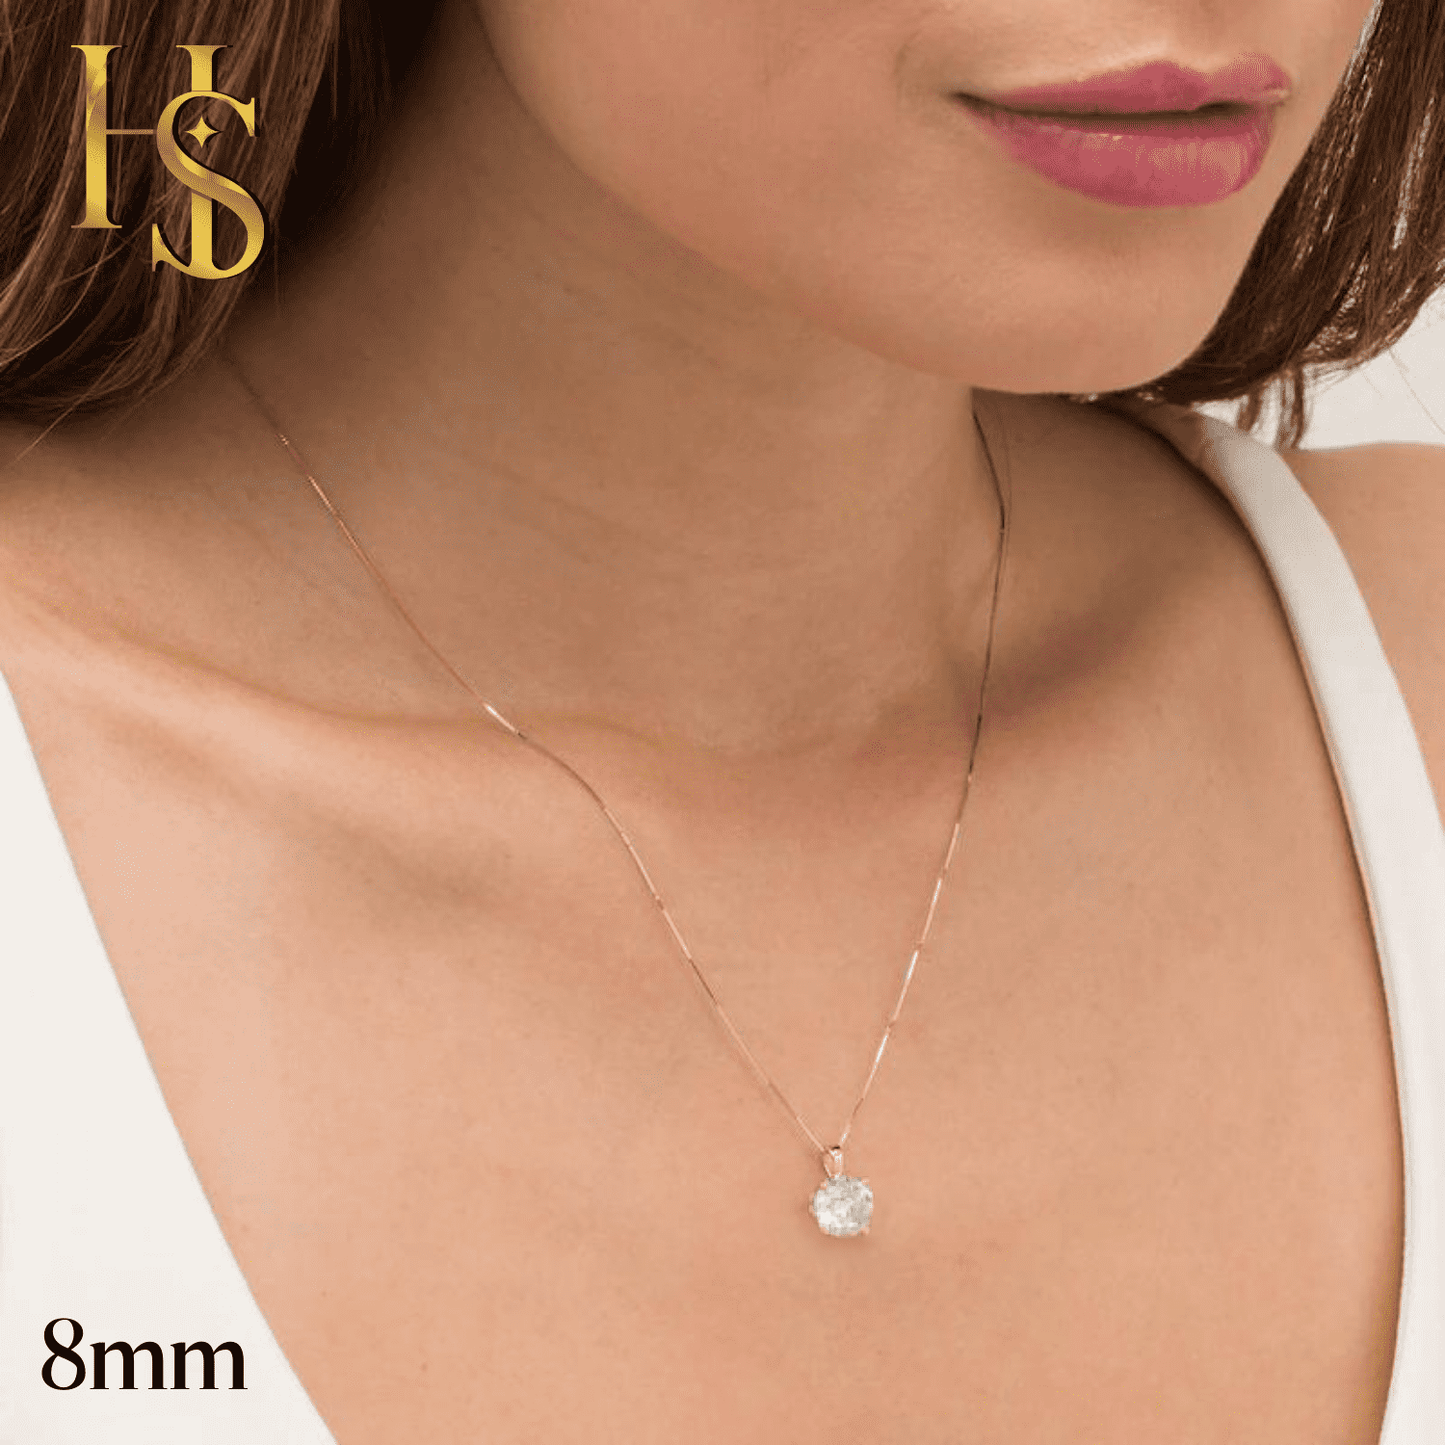 Rose Gold Solitaire Pendant with Chain in 92.5 Silver embellished with Swarovski Zirconia - 18K Rose Gold Finish